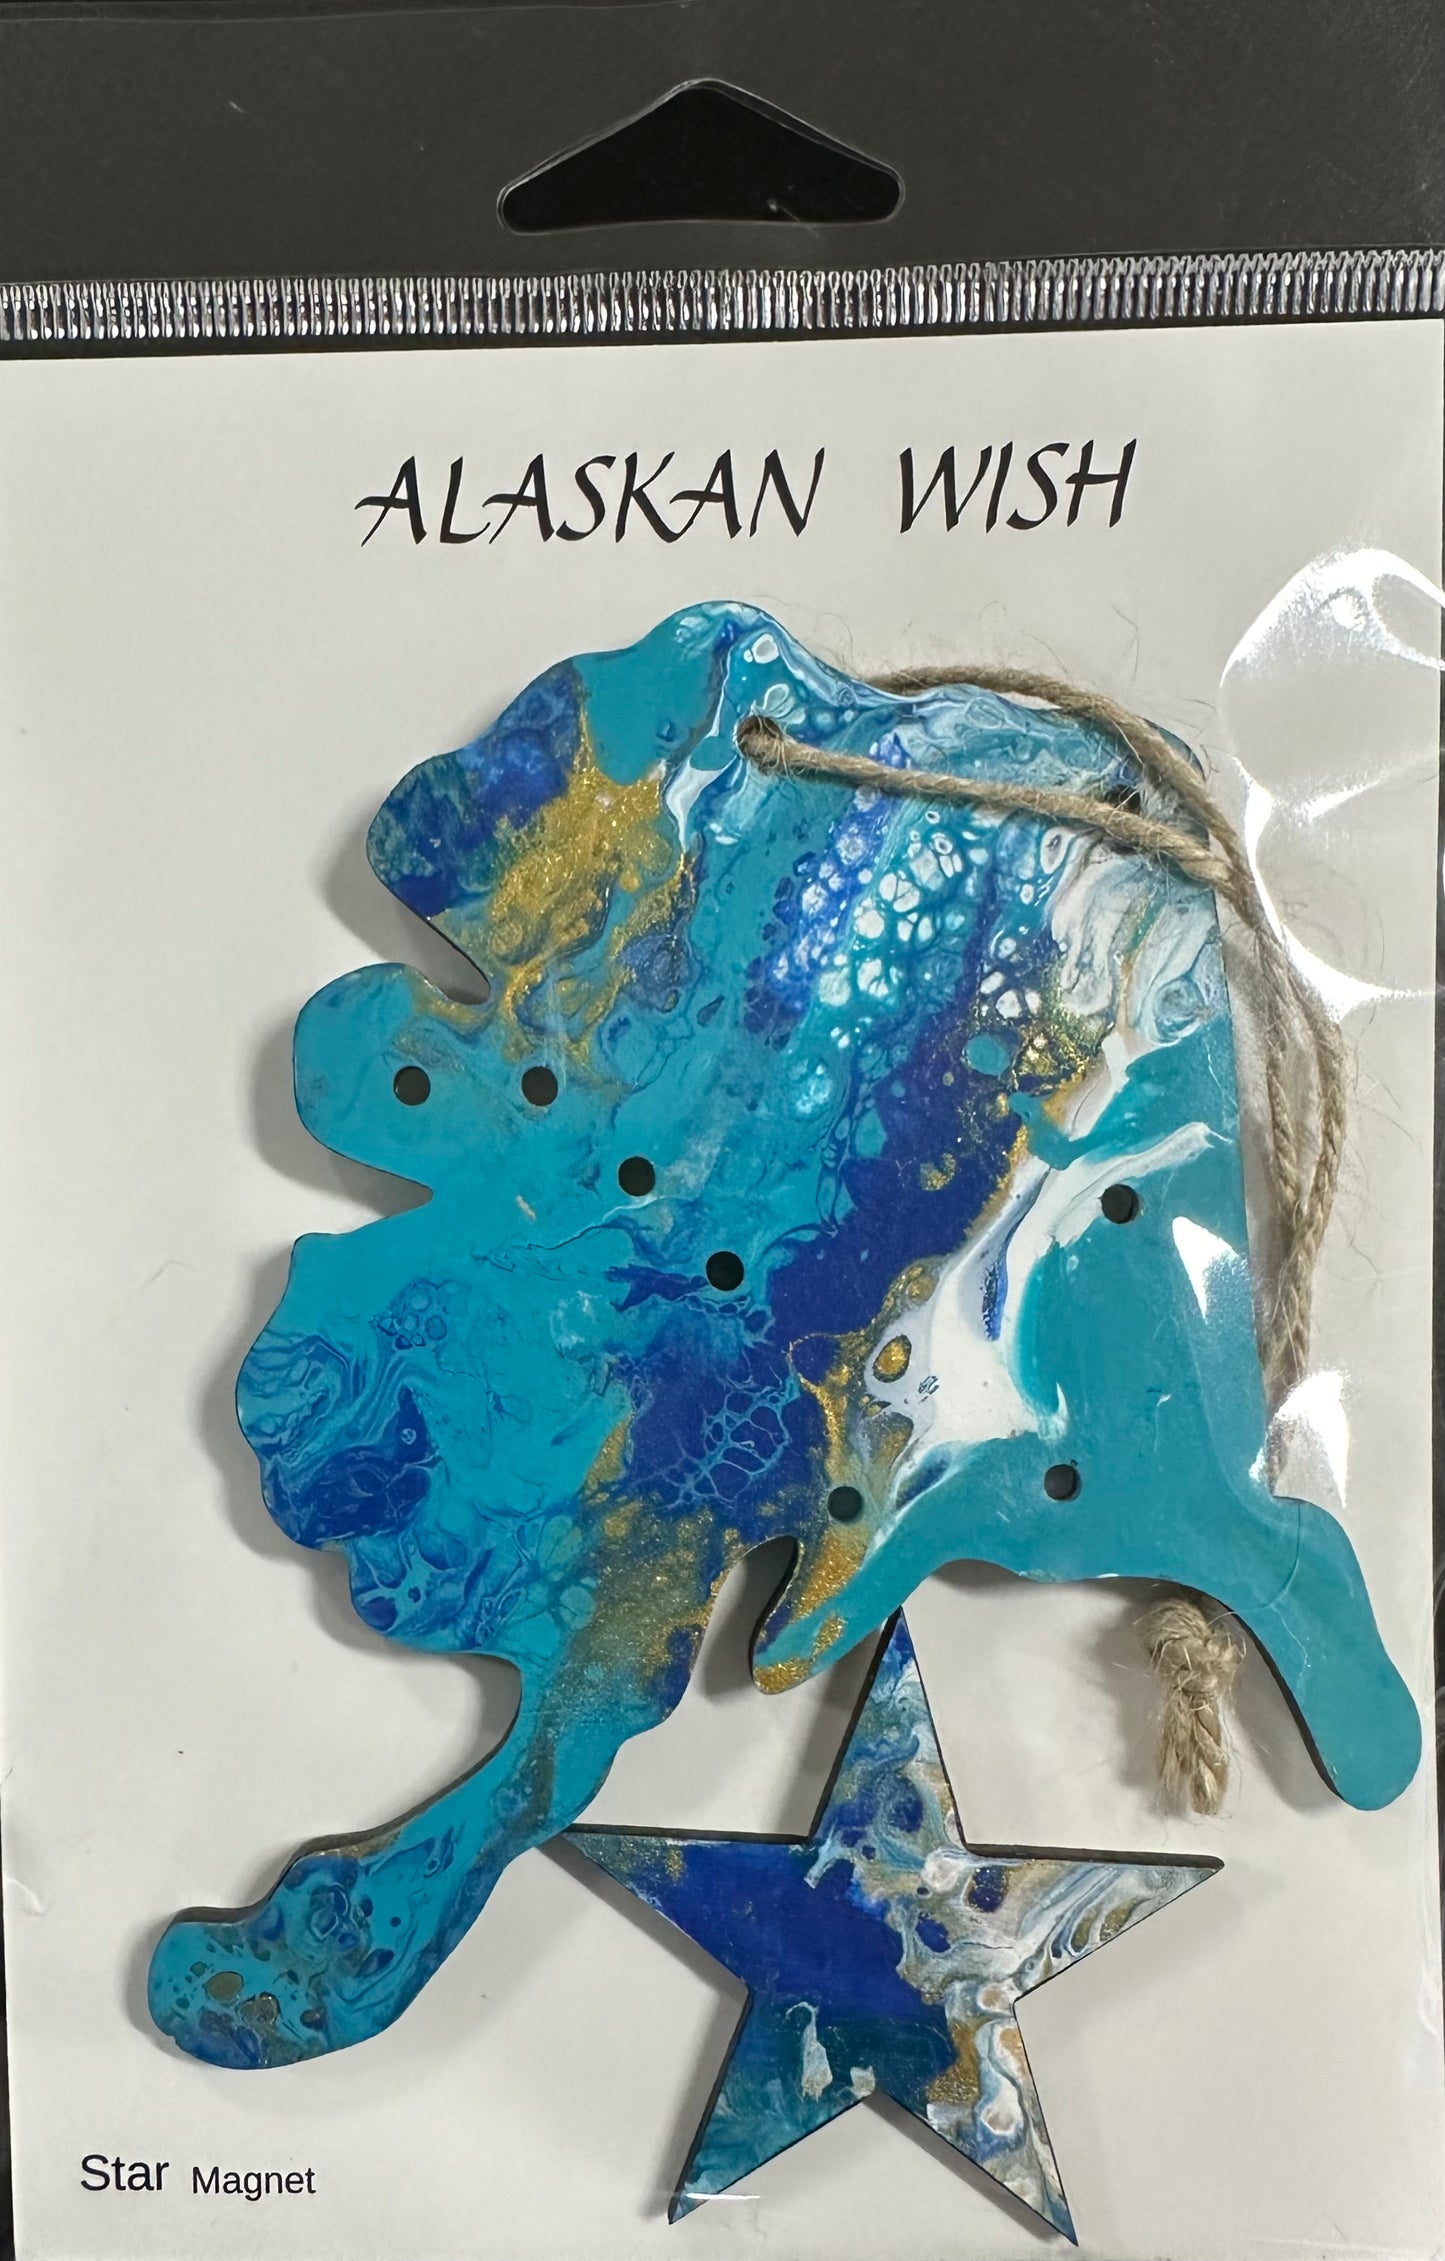 STATE OF ALASKA ORNAMENT (With Big Dipper Drilled Out)